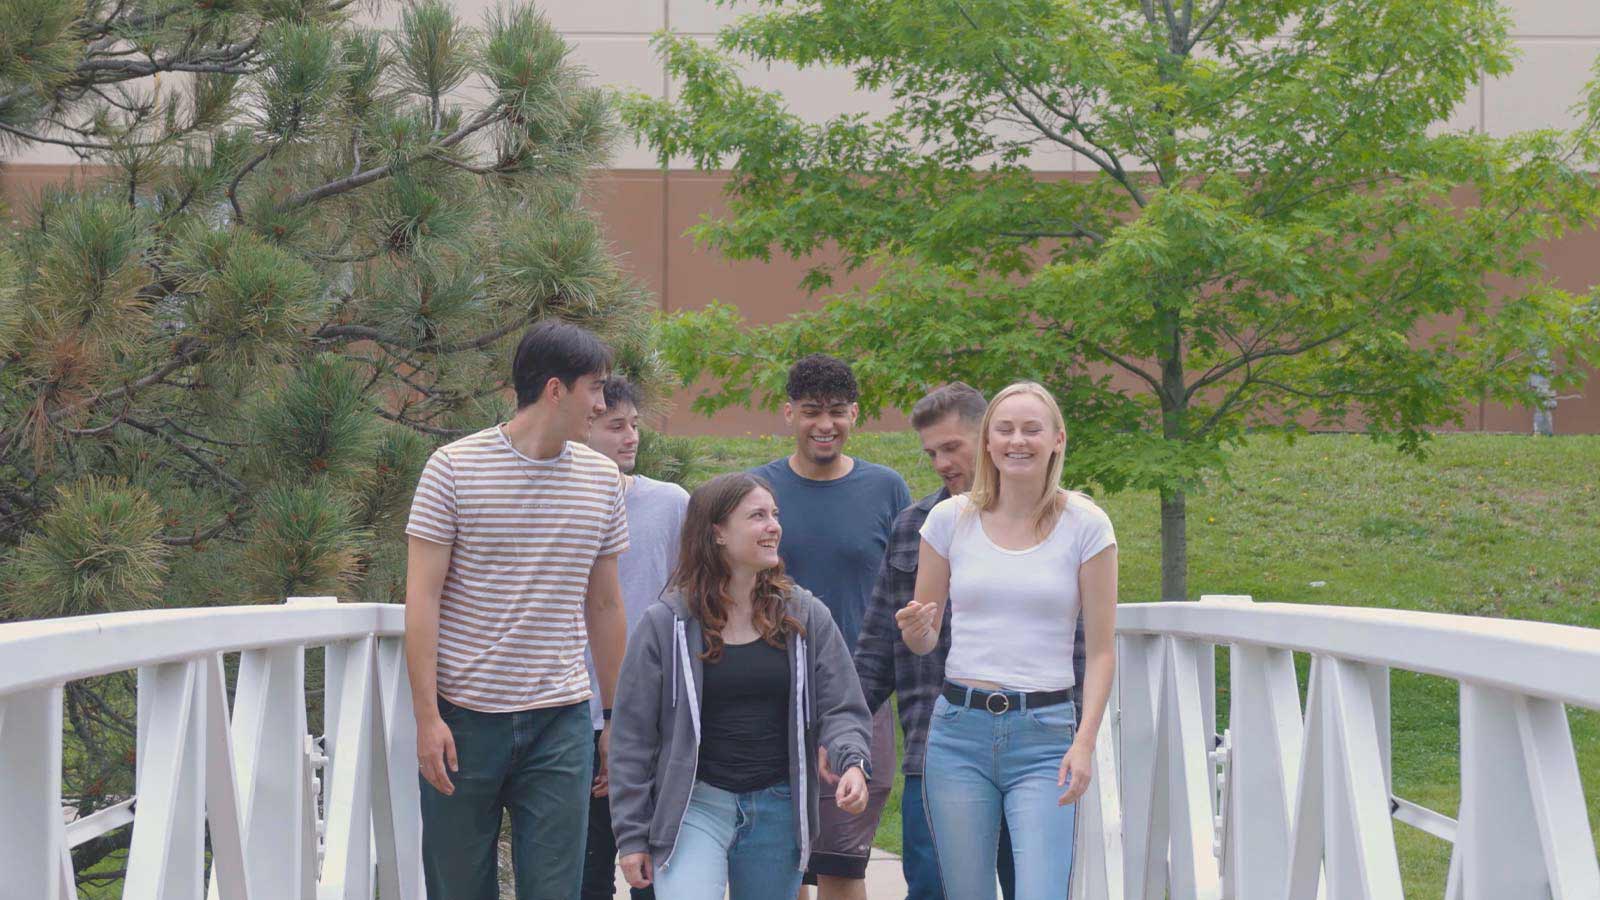 A group of young adults walking and chatting on an outdoor bridge in a tranquil environment.